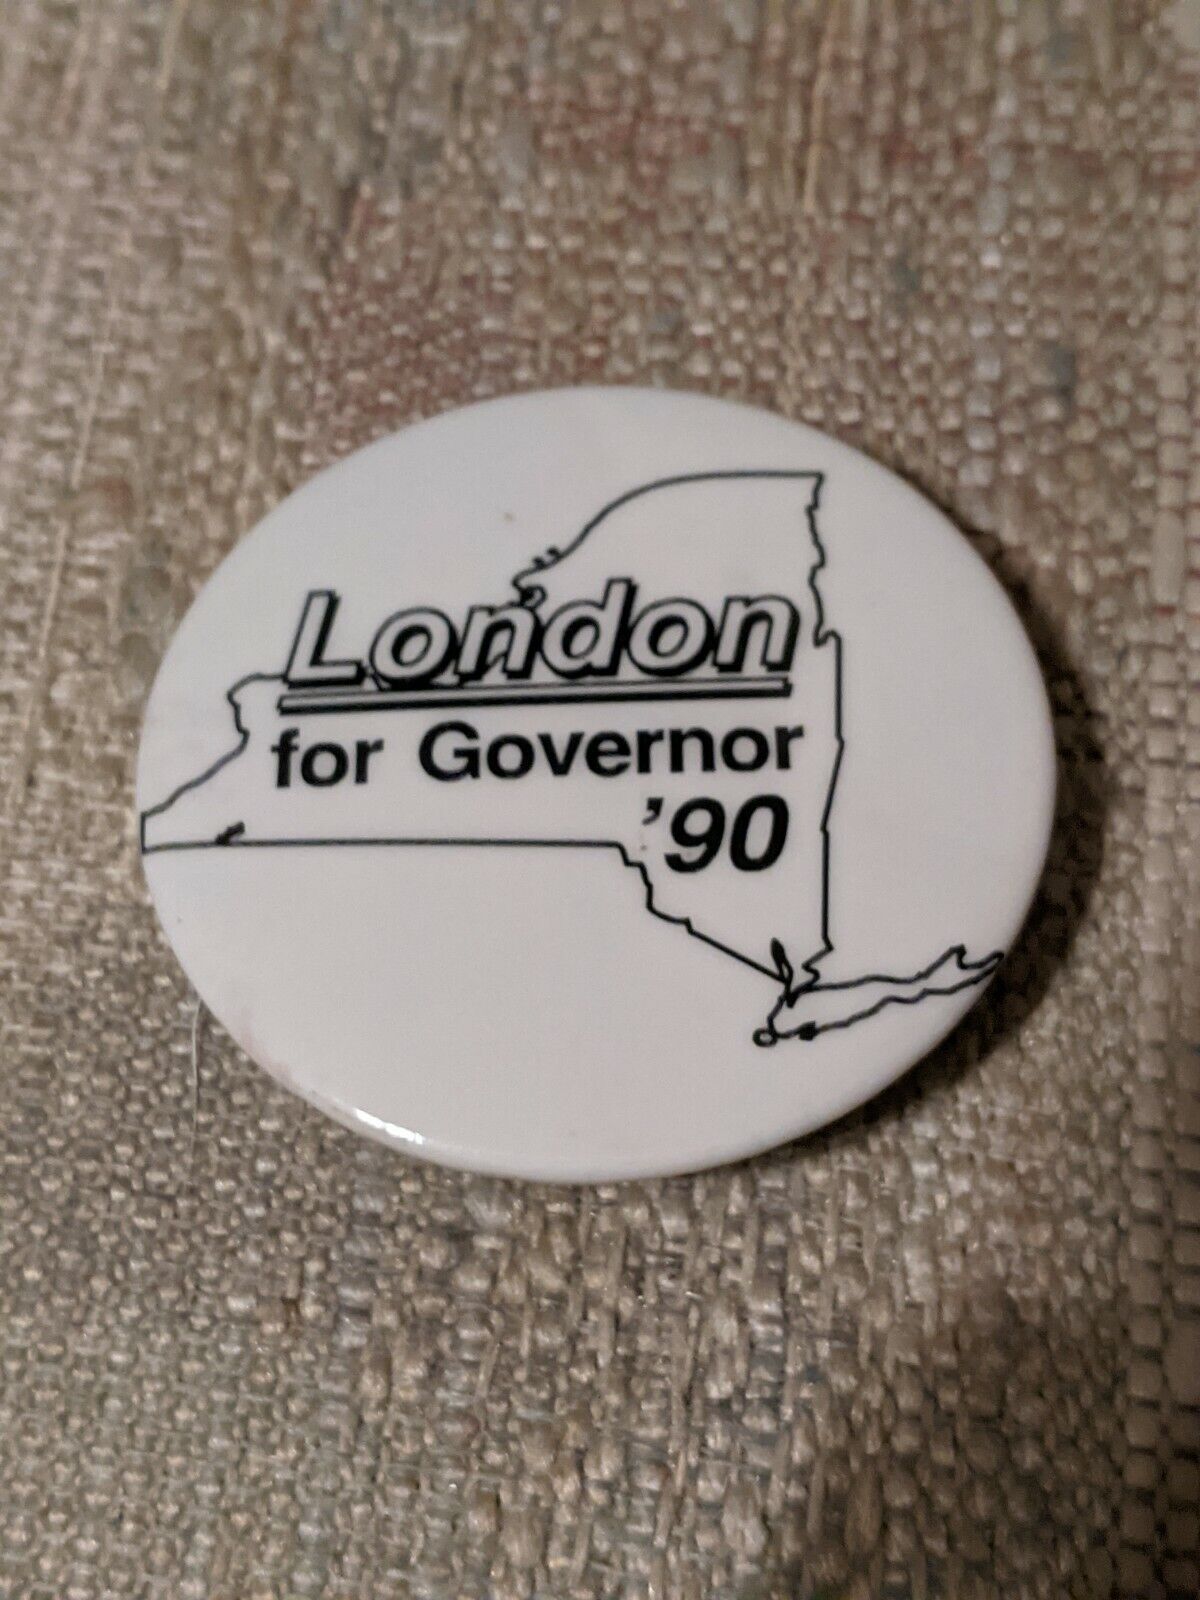 Herb London for New York State Governor 1990 Campaign Button - VERY RARE